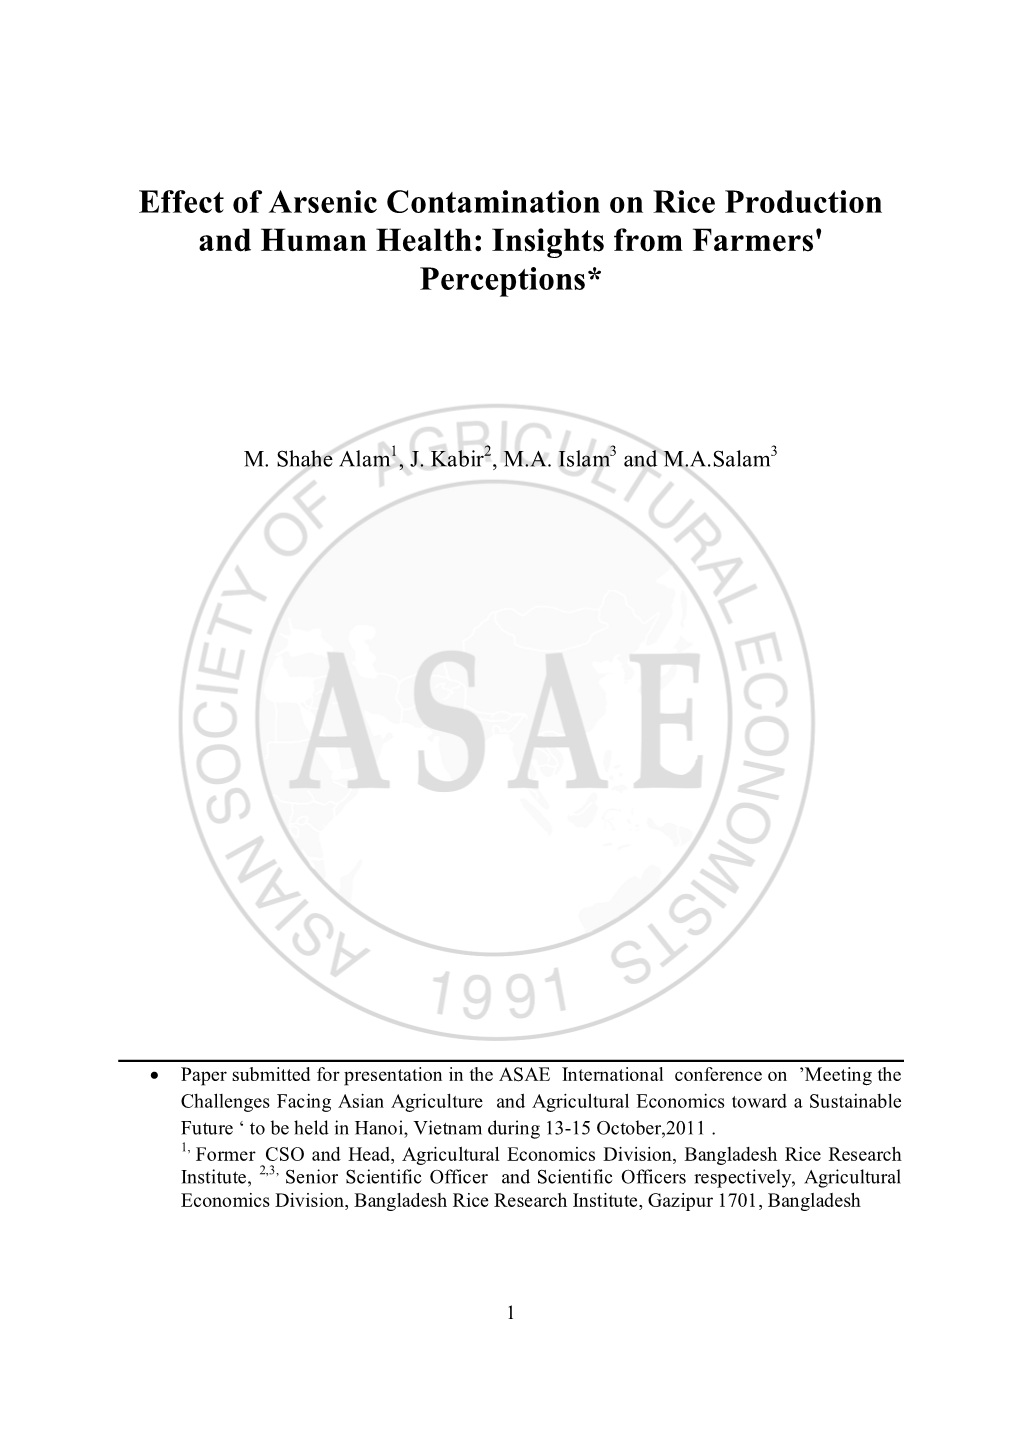 Effect of Arsenic Contamination on Rice Production and Human Health: Insights from Farmers' Perceptions*